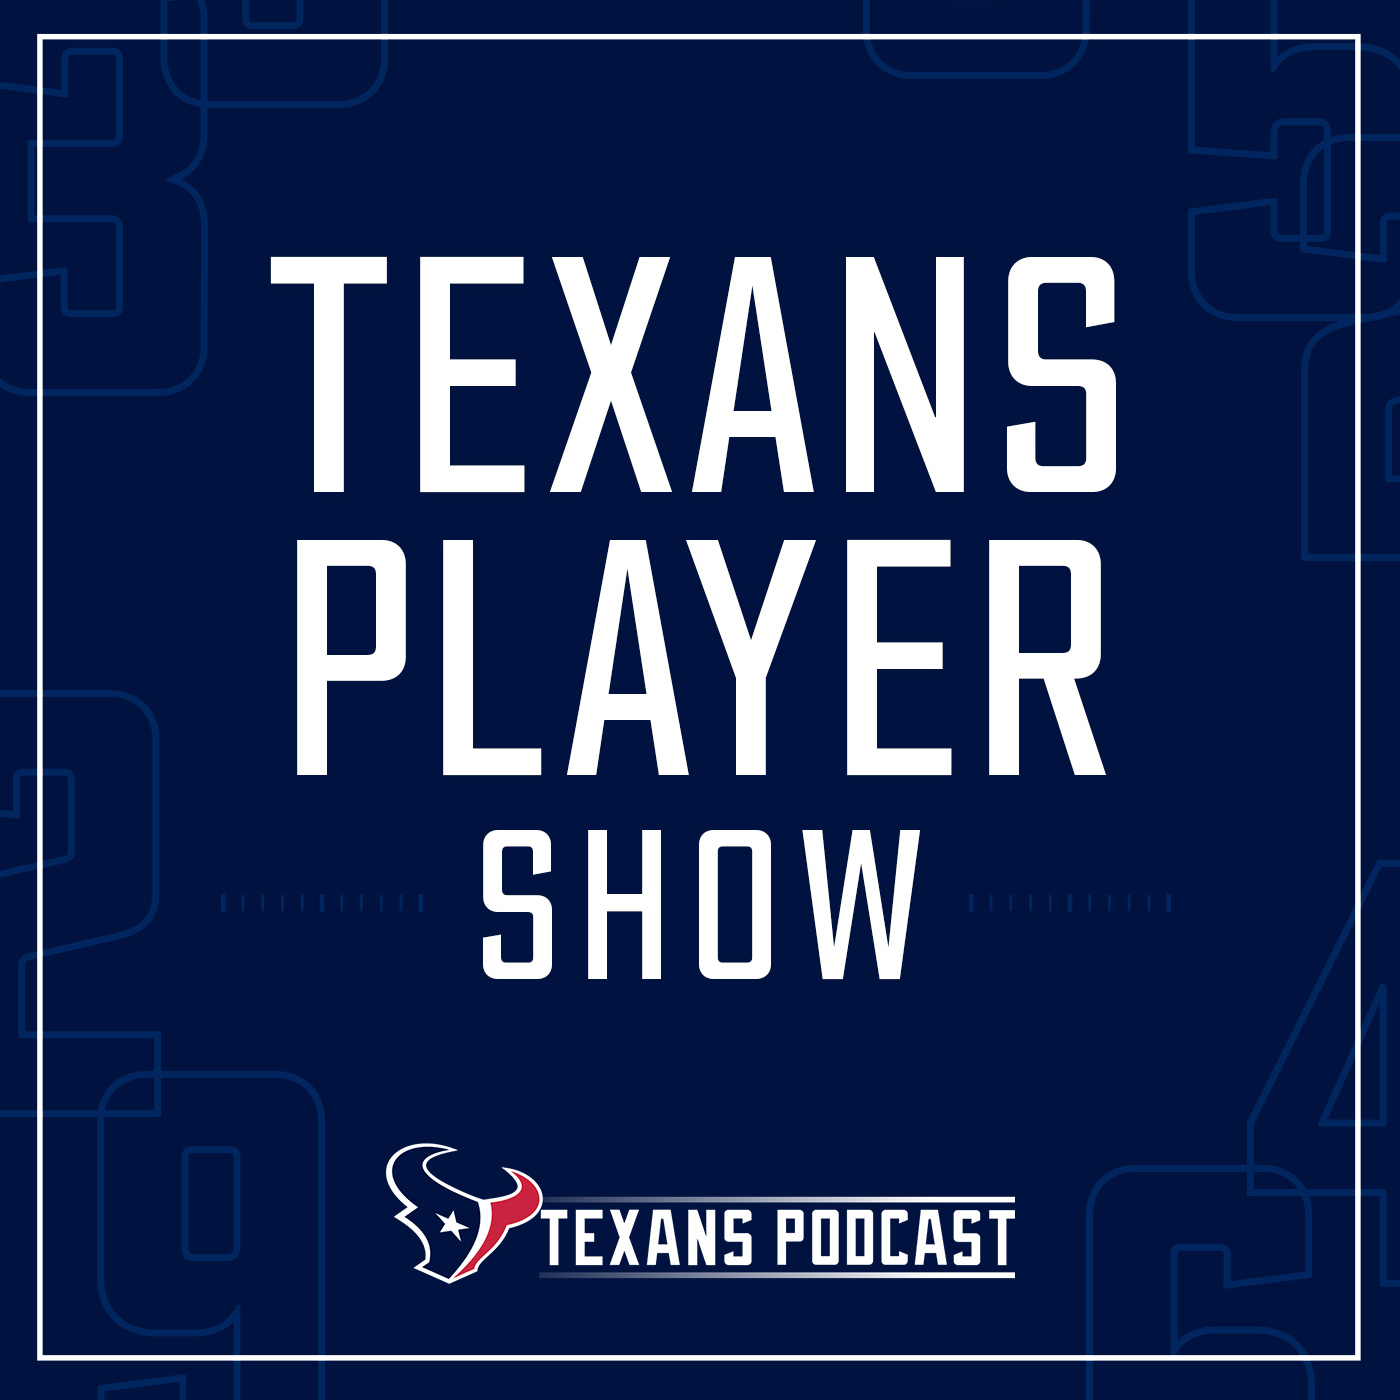 Ready for the Eagles | Texans Player Show